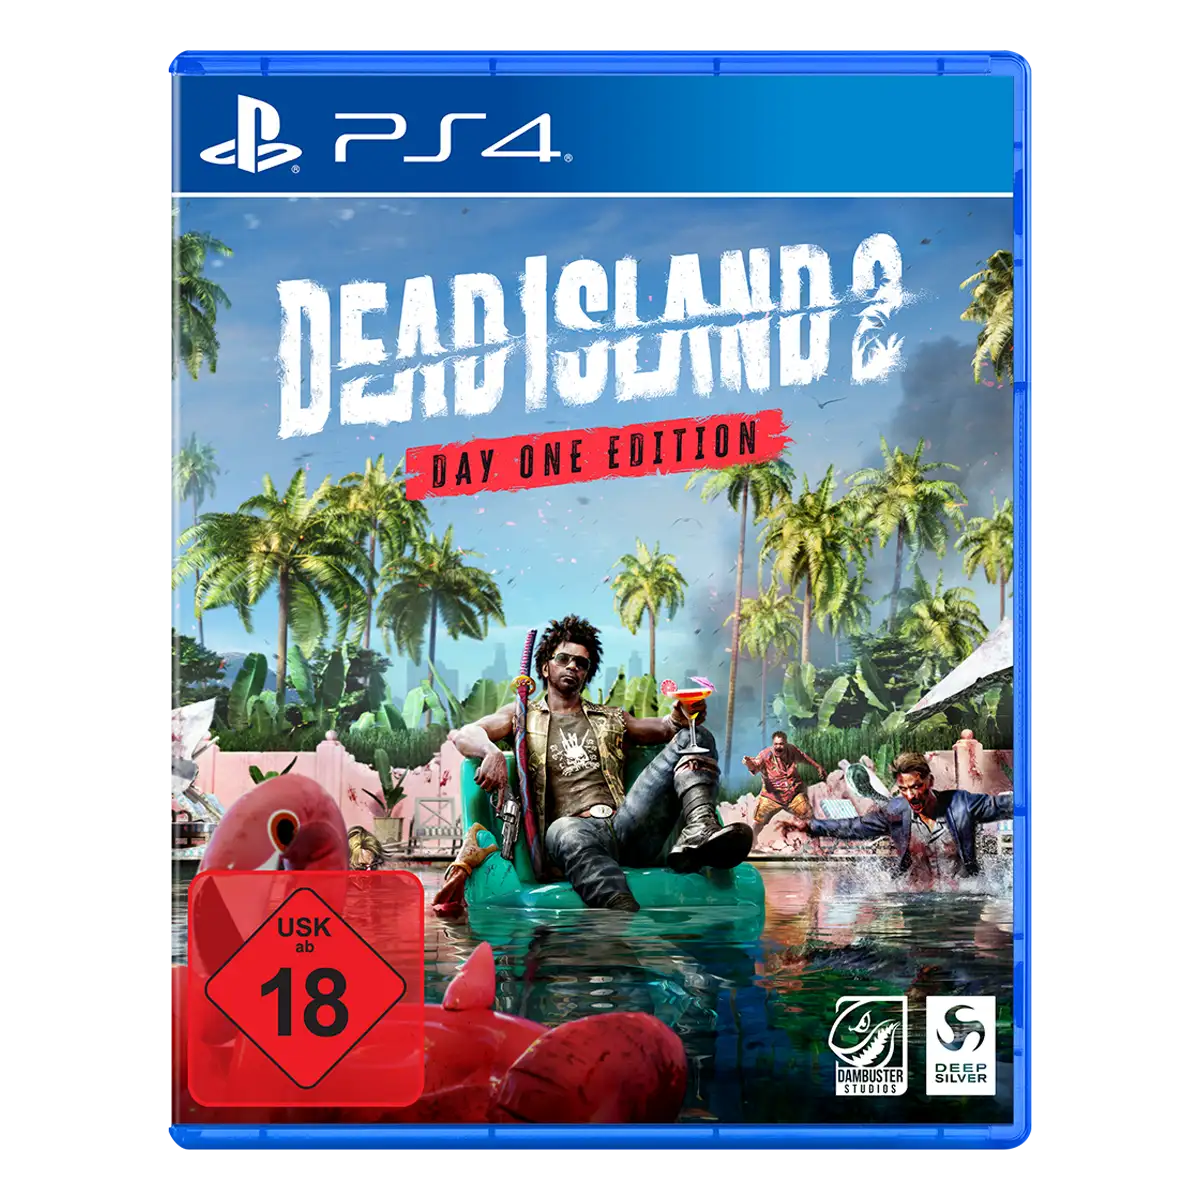 Dead Island 2 Day One Edition (PS4) (USK) Cover